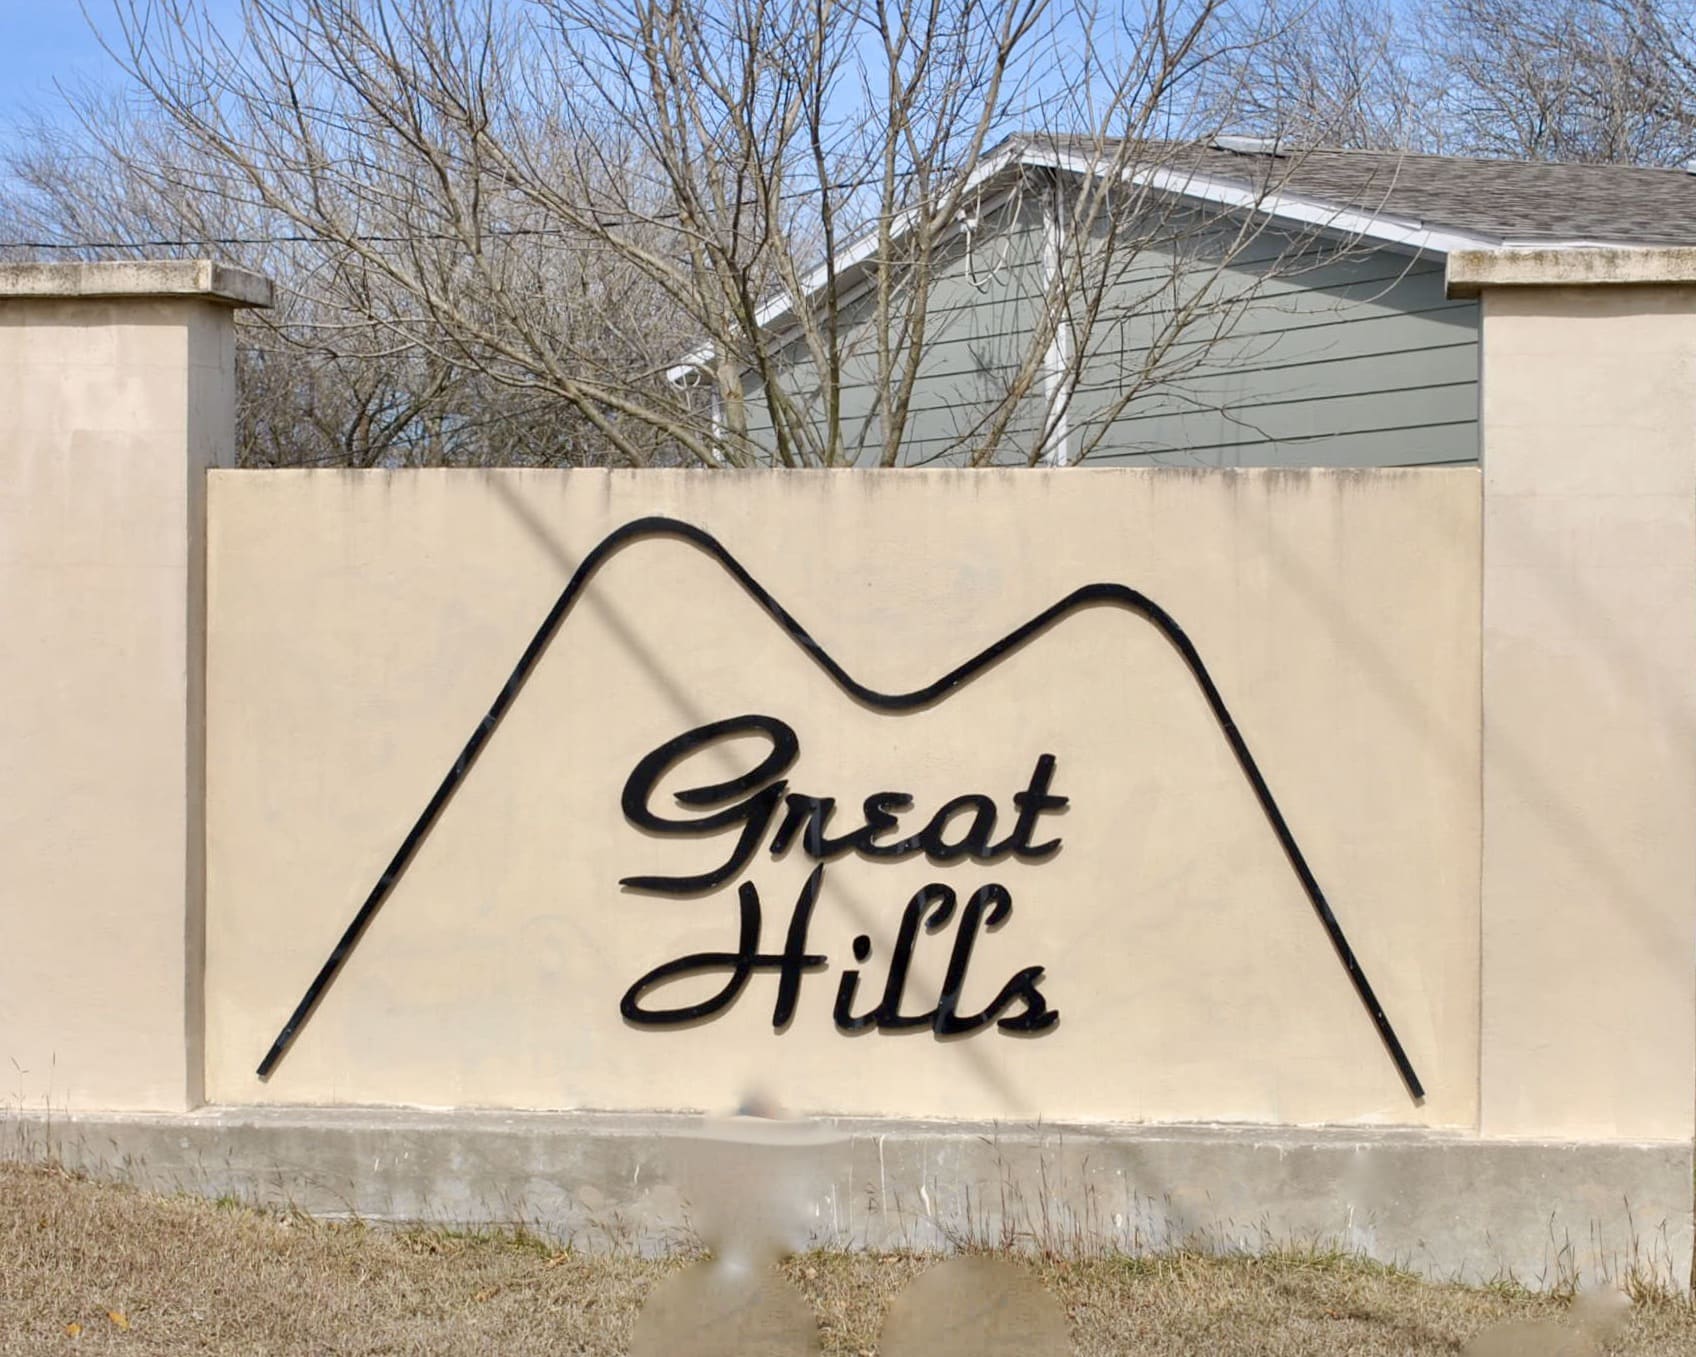 a sign on a wall that says great hills on it